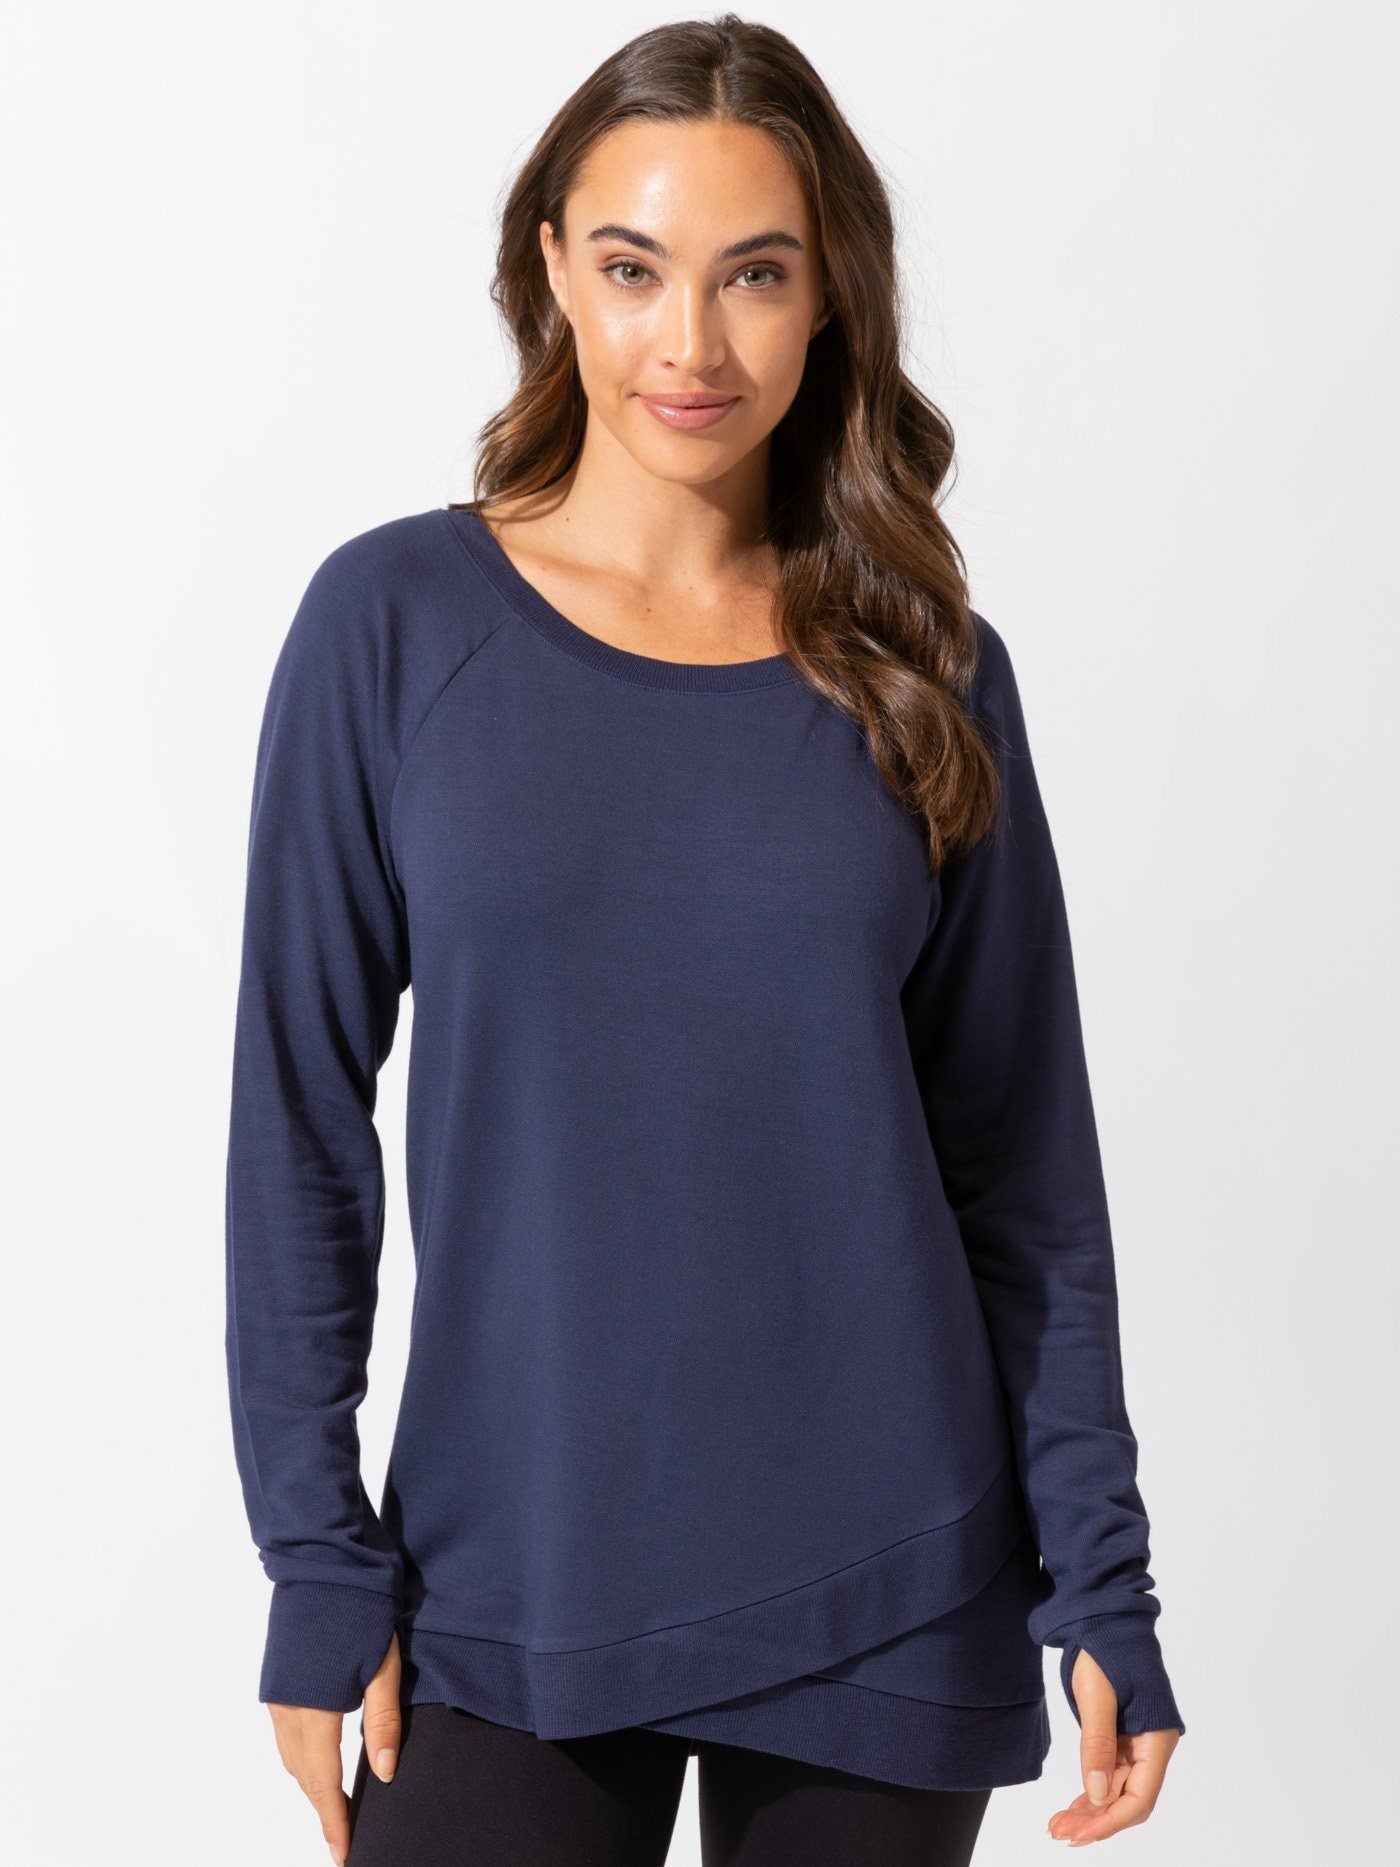 Leanna Feather Fleece Tunic in Raw Denim – Threads 4 Thought